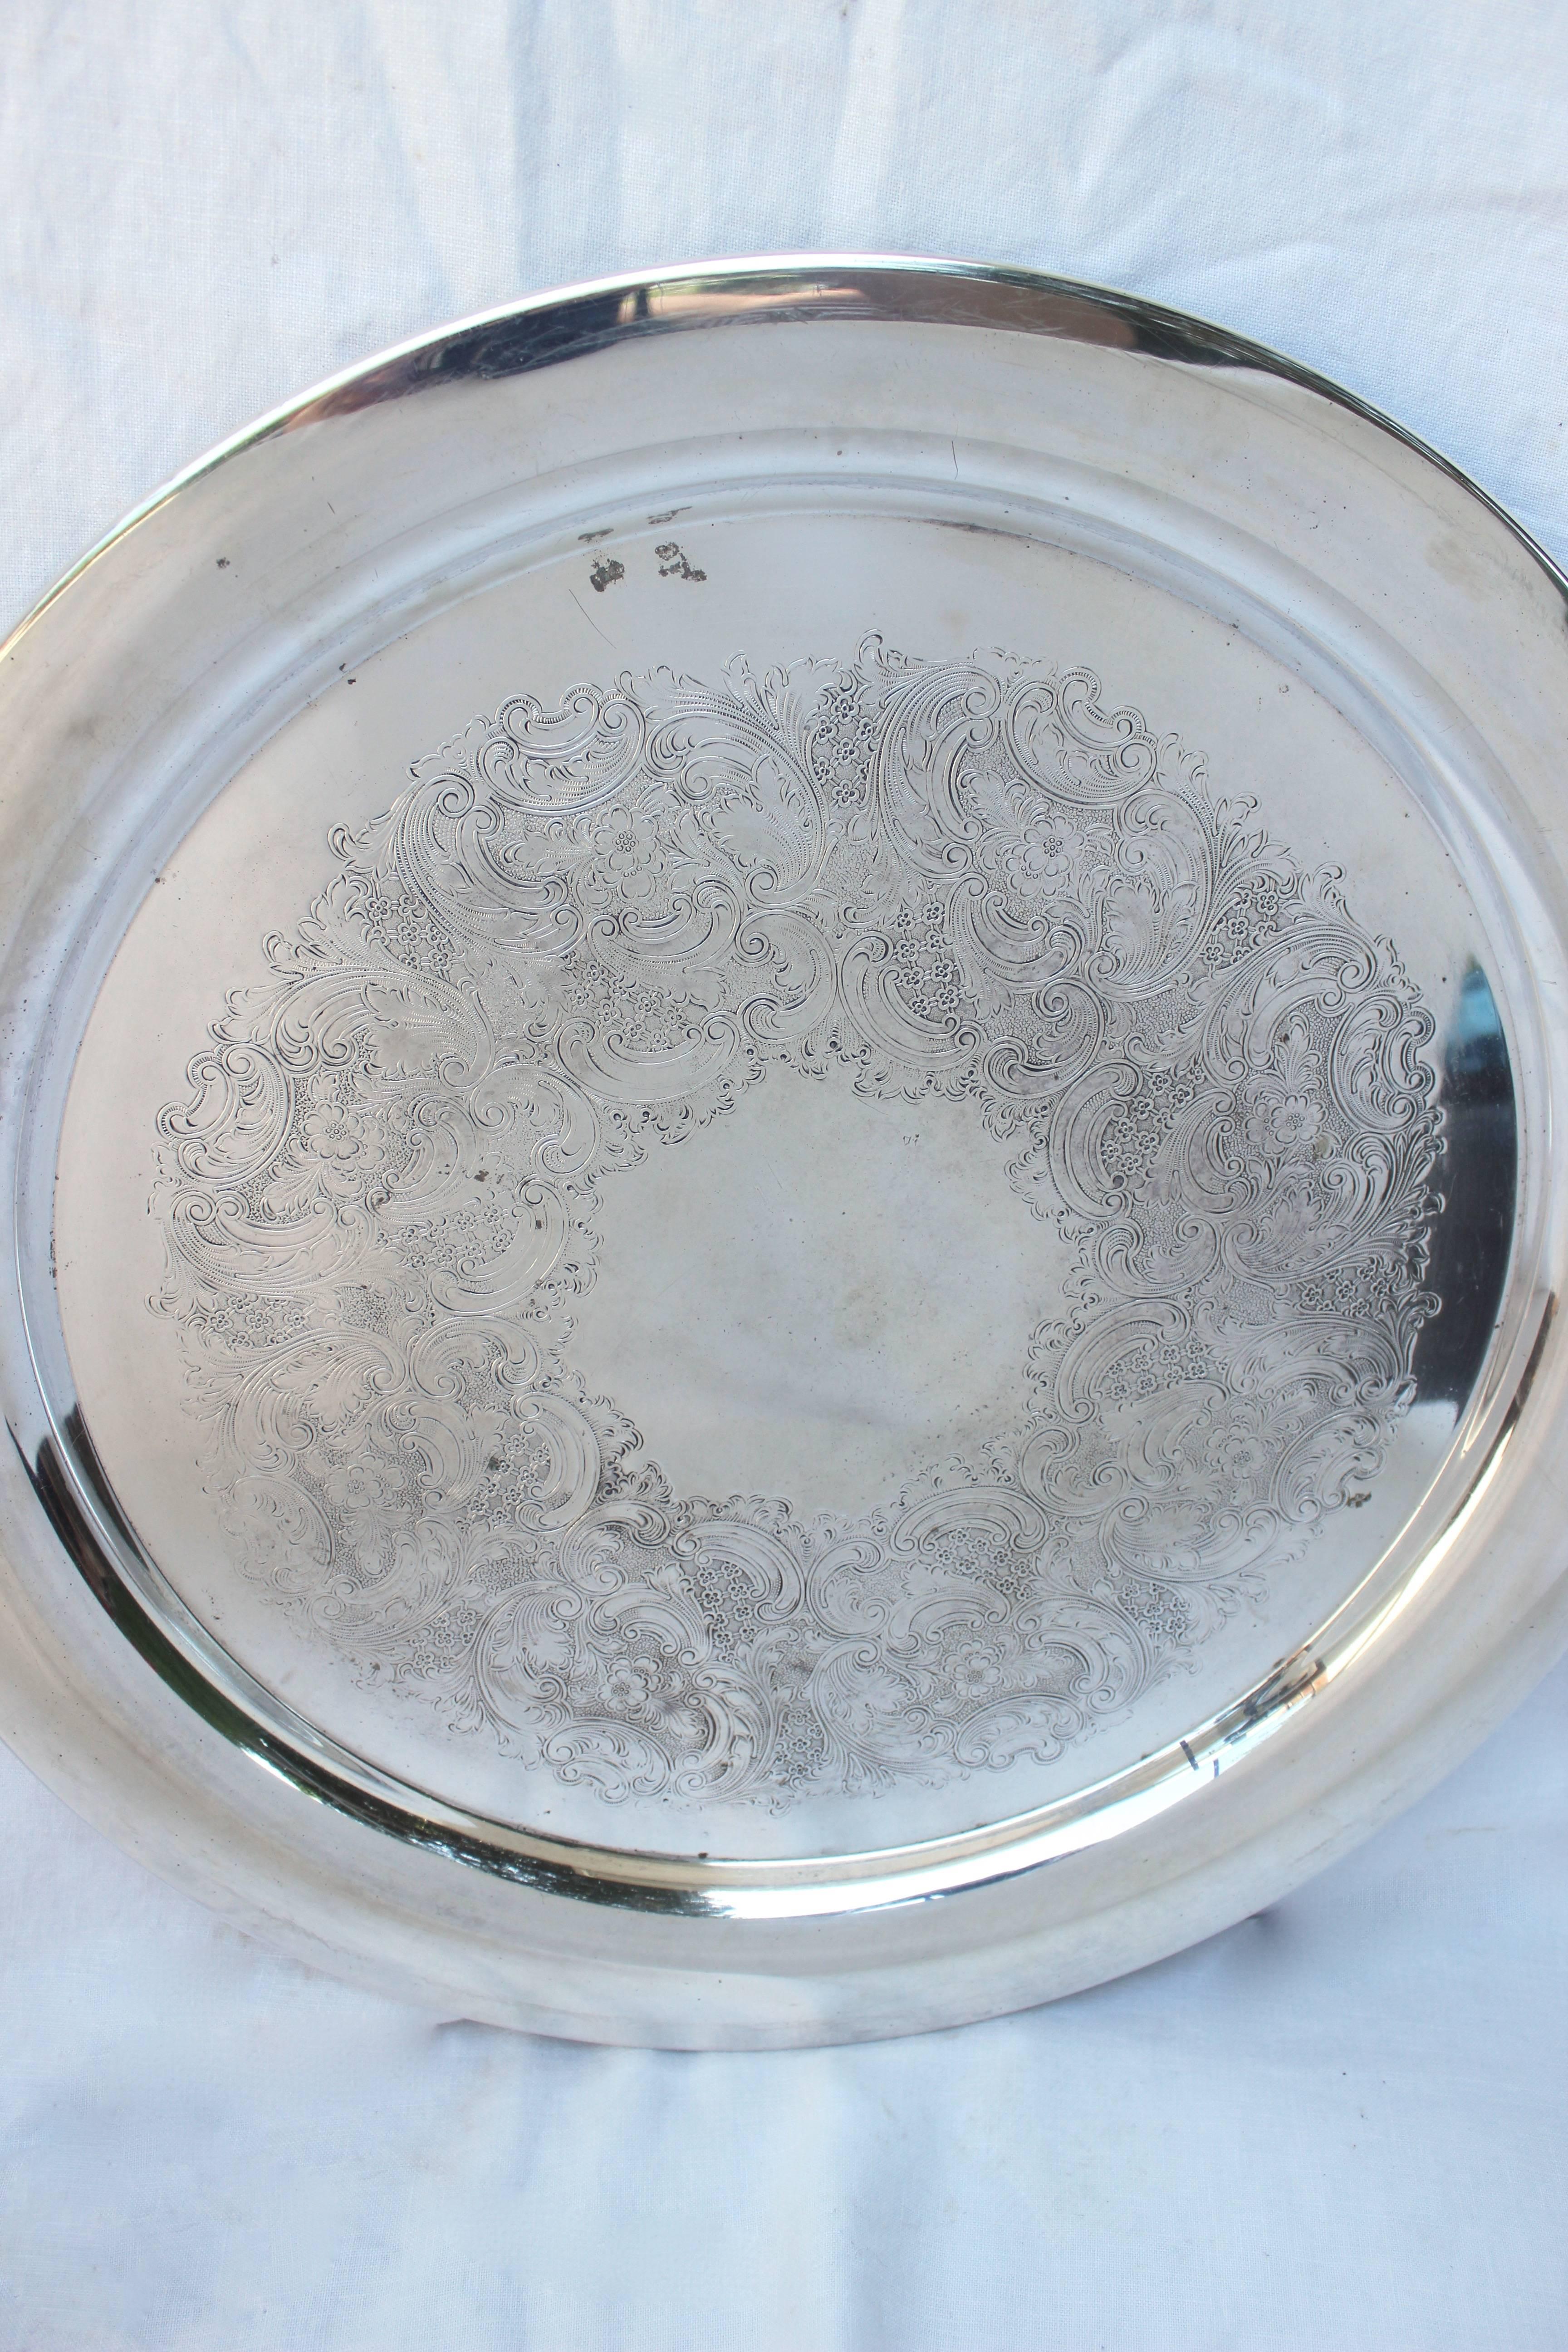 Large Gorham silver plate engraved tray. Measures: 21